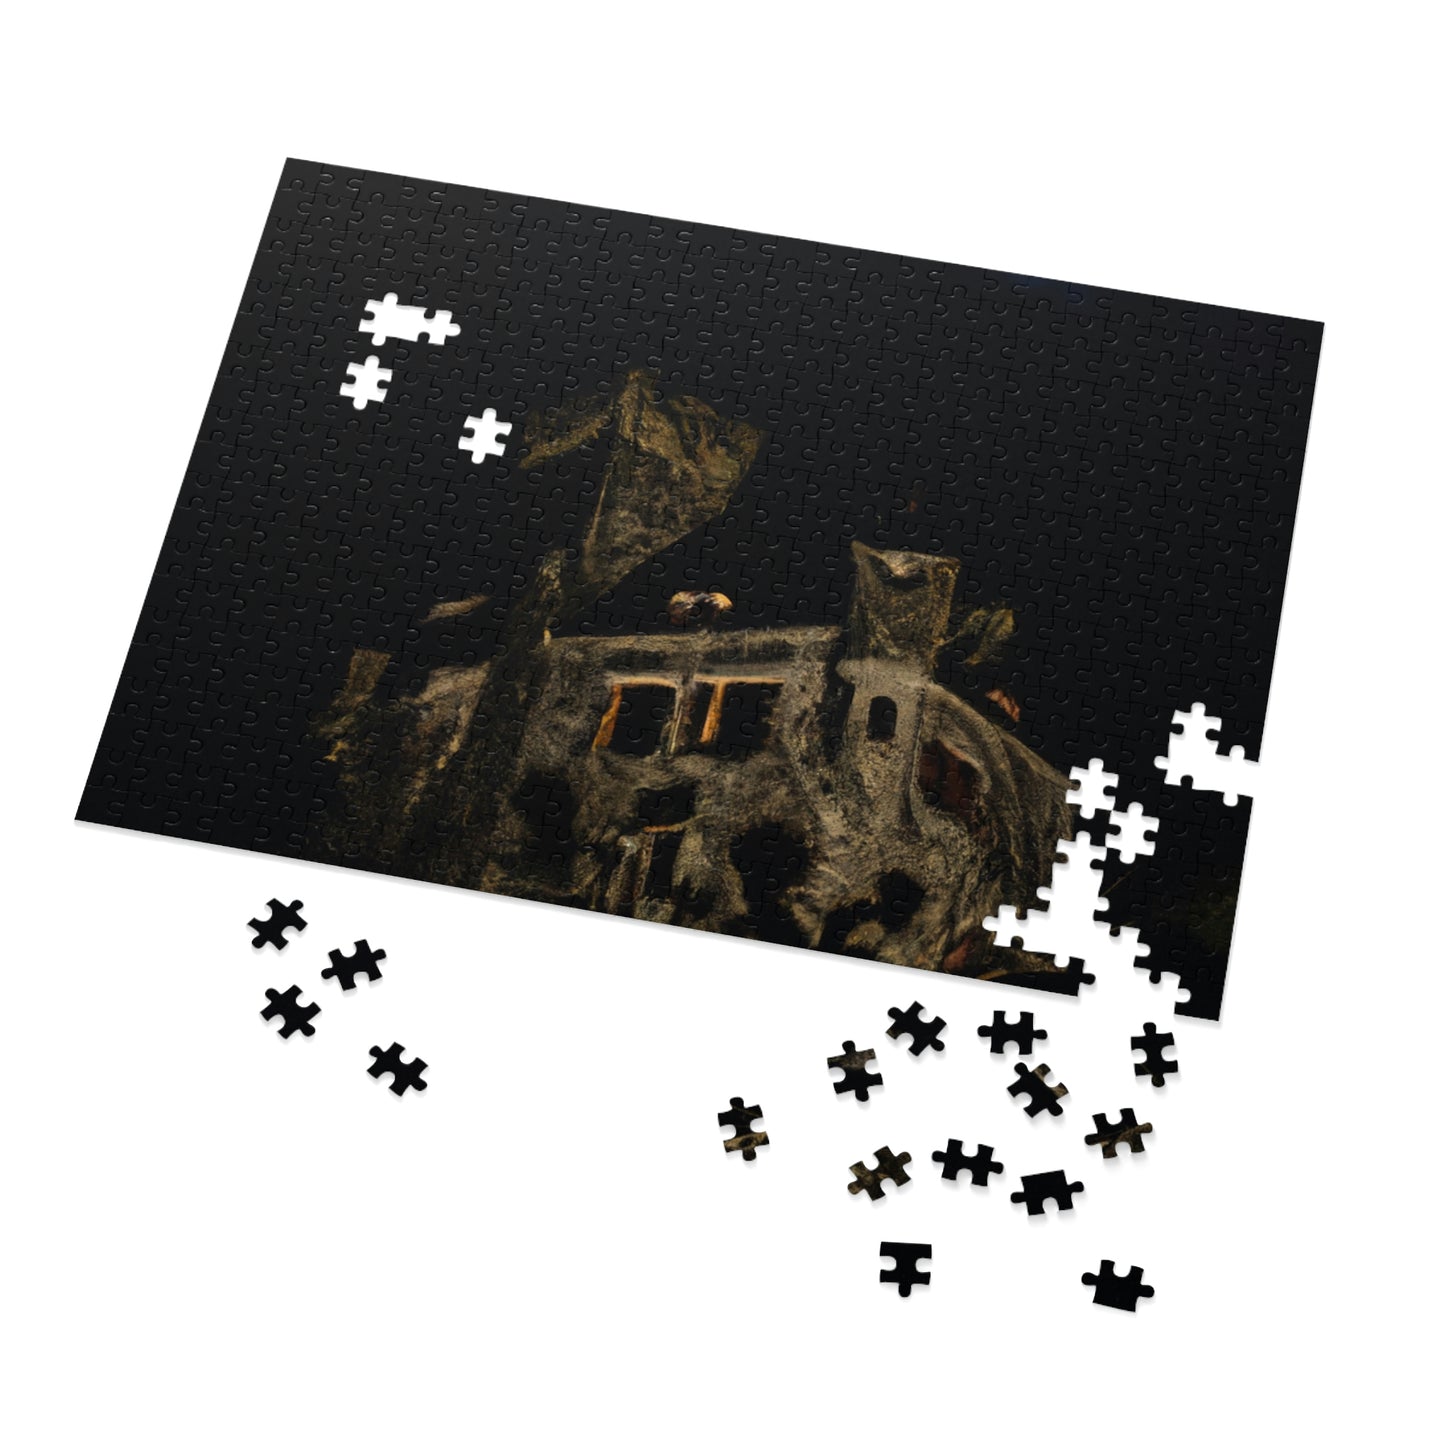 "The Midnight Castle Visitation" - The Alien Jigsaw Puzzle